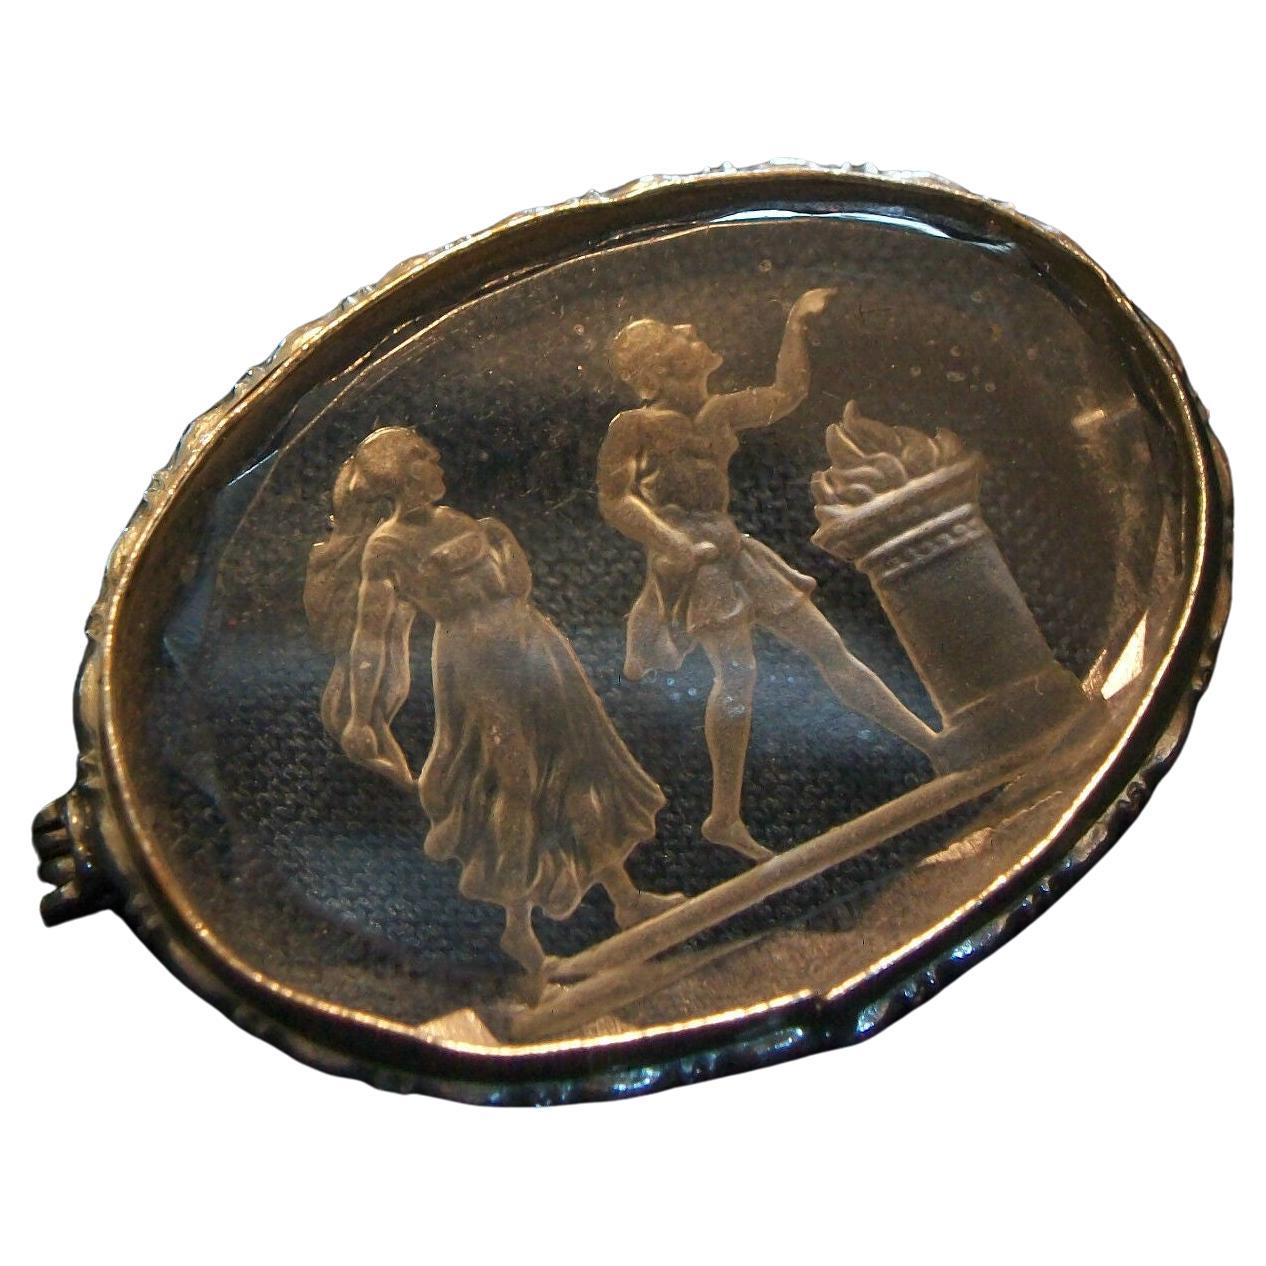 Antique Crystal Reverse Intaglio Brooch, Unsigned, France, Early 20th Century